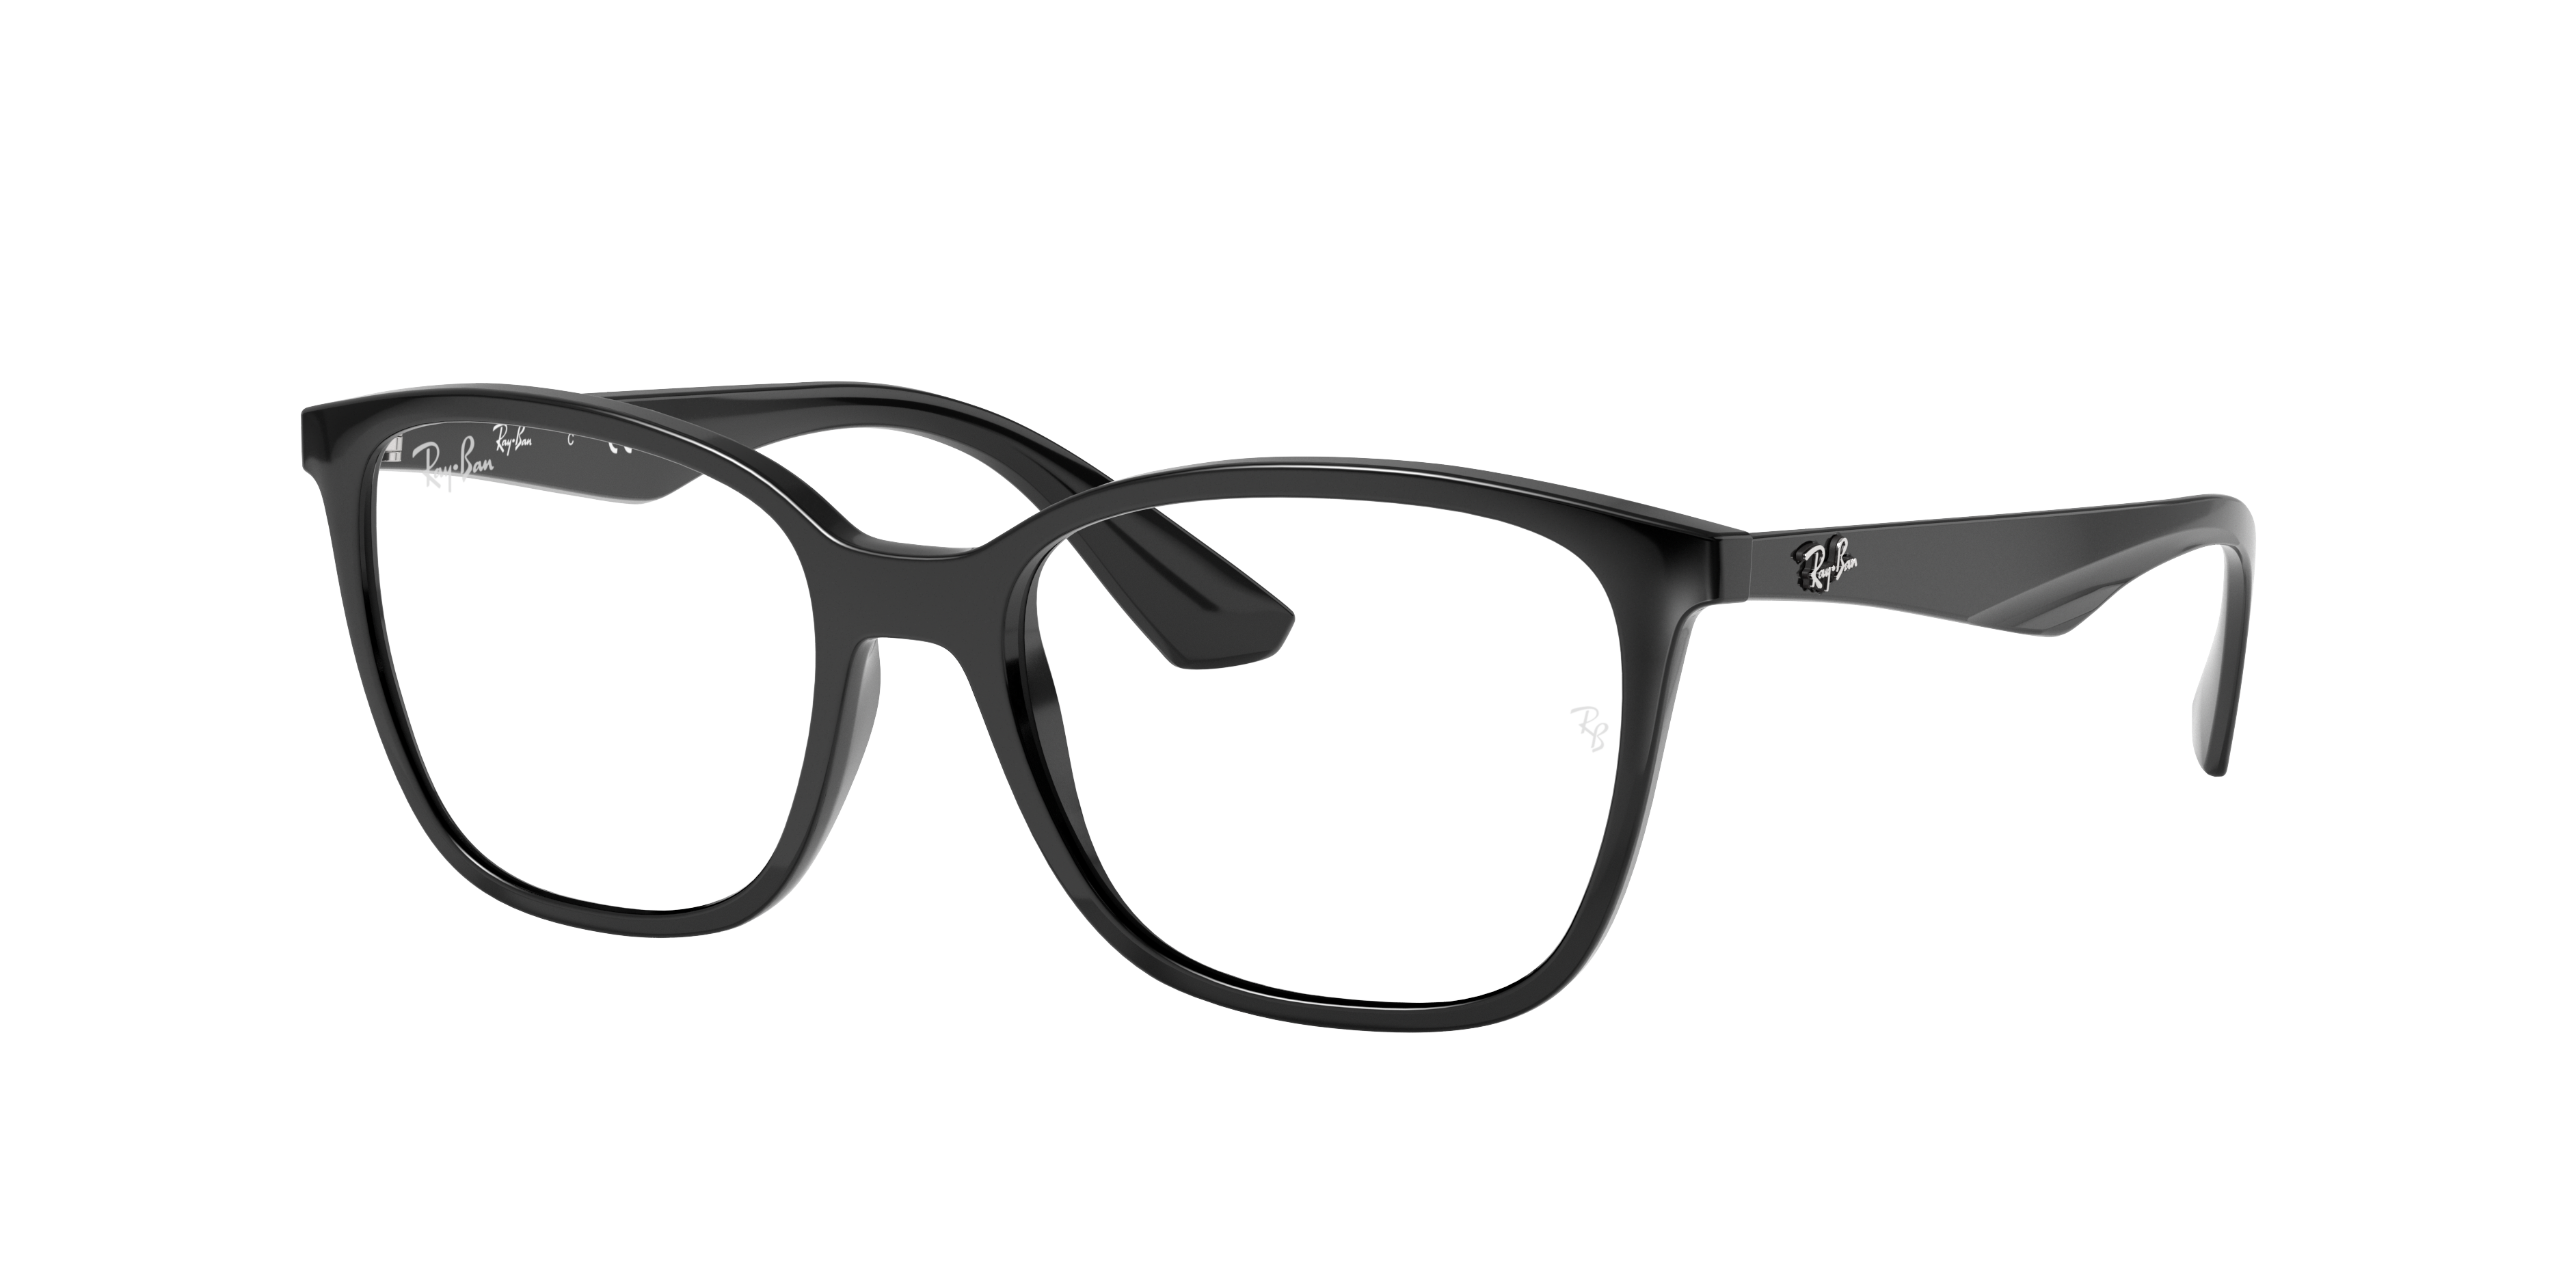 Ray-Ban 0RX7066 in Black Glasses | OPSM